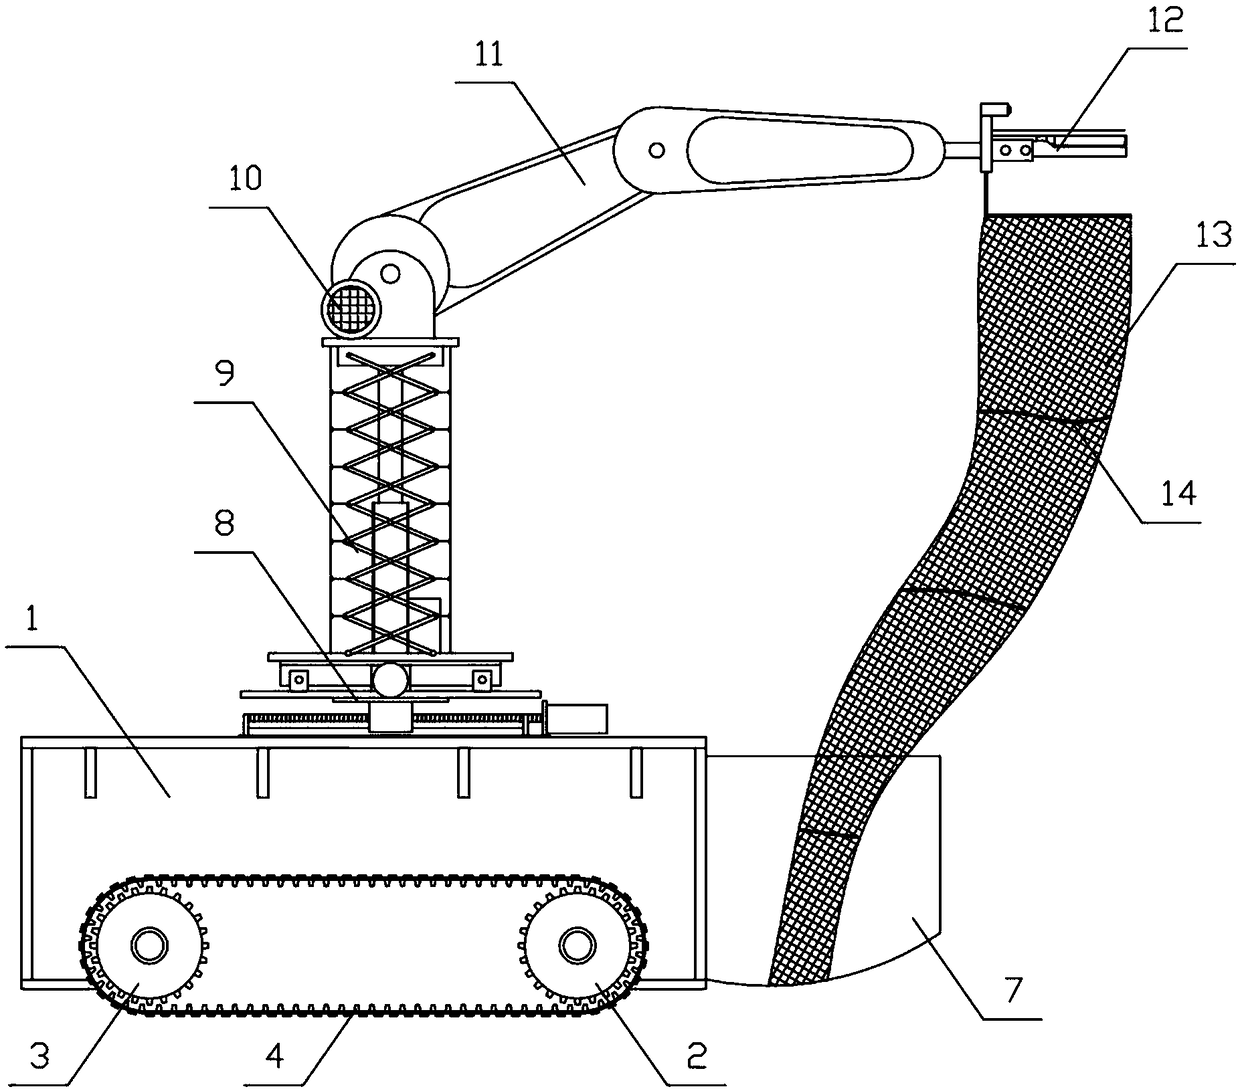 Full-automatic fruit picking device